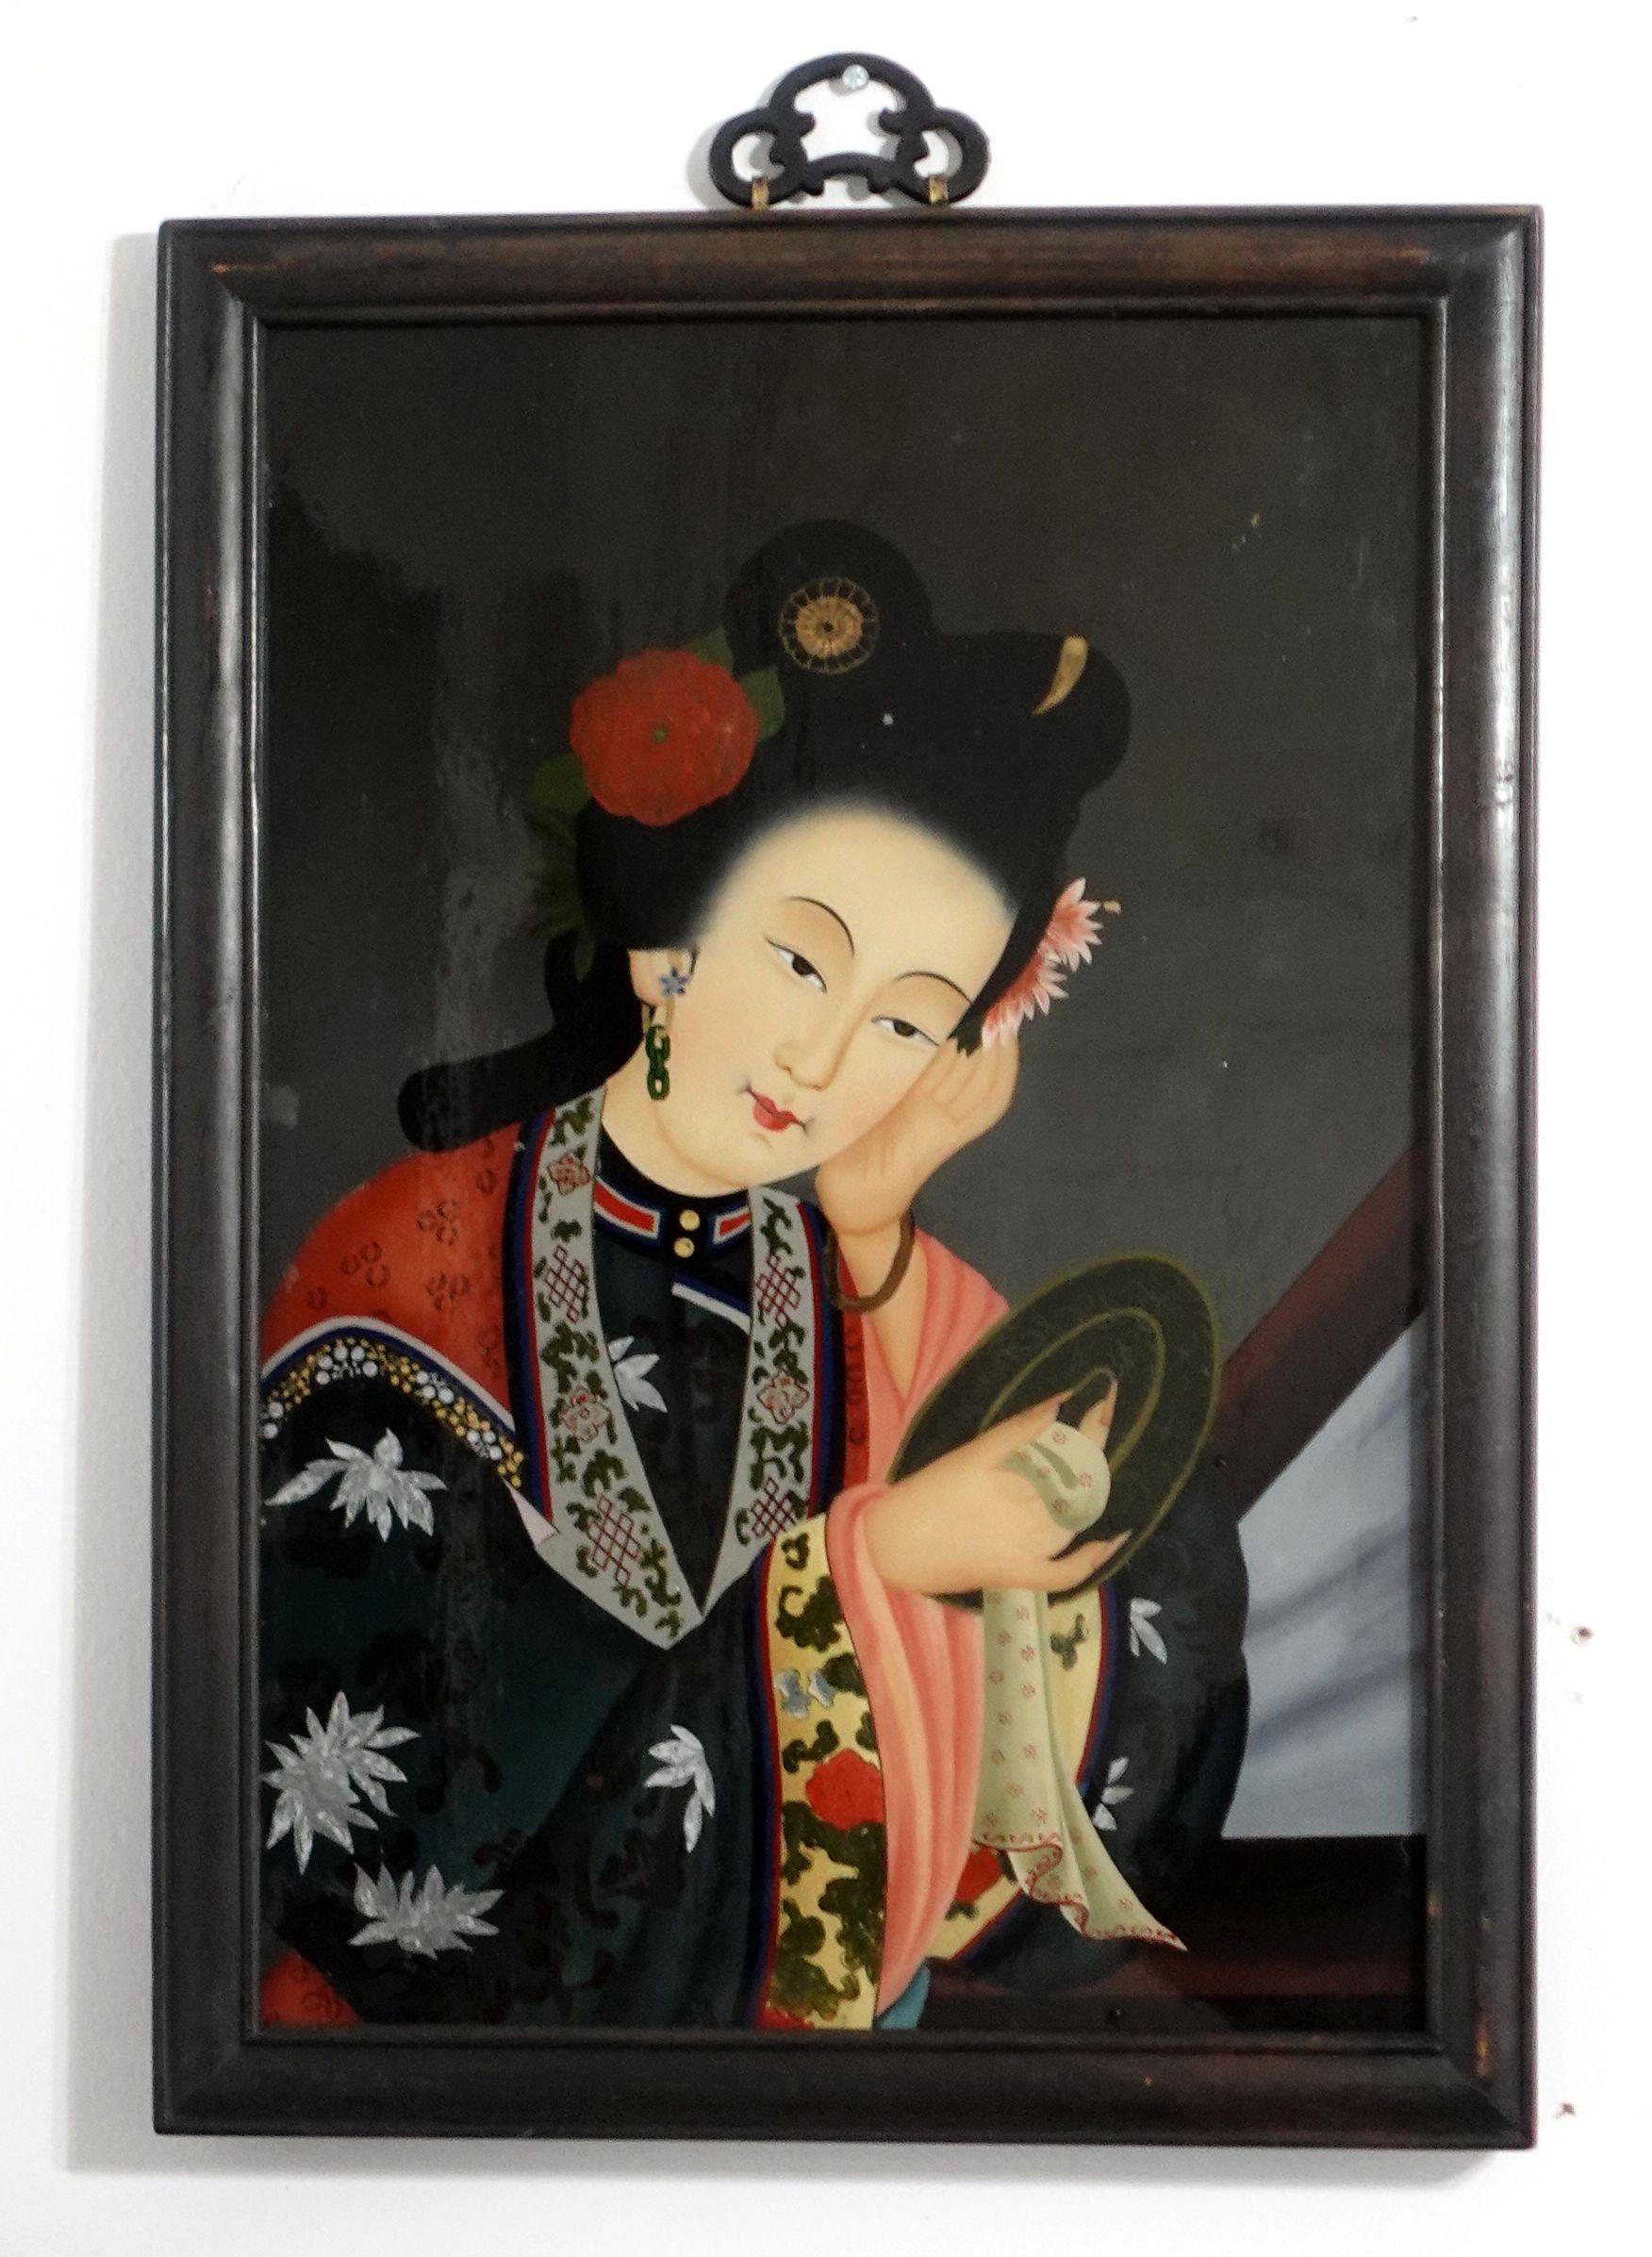 Pair of charming 19th-century Chinese export reverse glass paintings, depicting the beauty of traditional Chinese customs and clothing decorations on the noblewomen.  The paintings come with their original hardwood frame and the old pins in the back